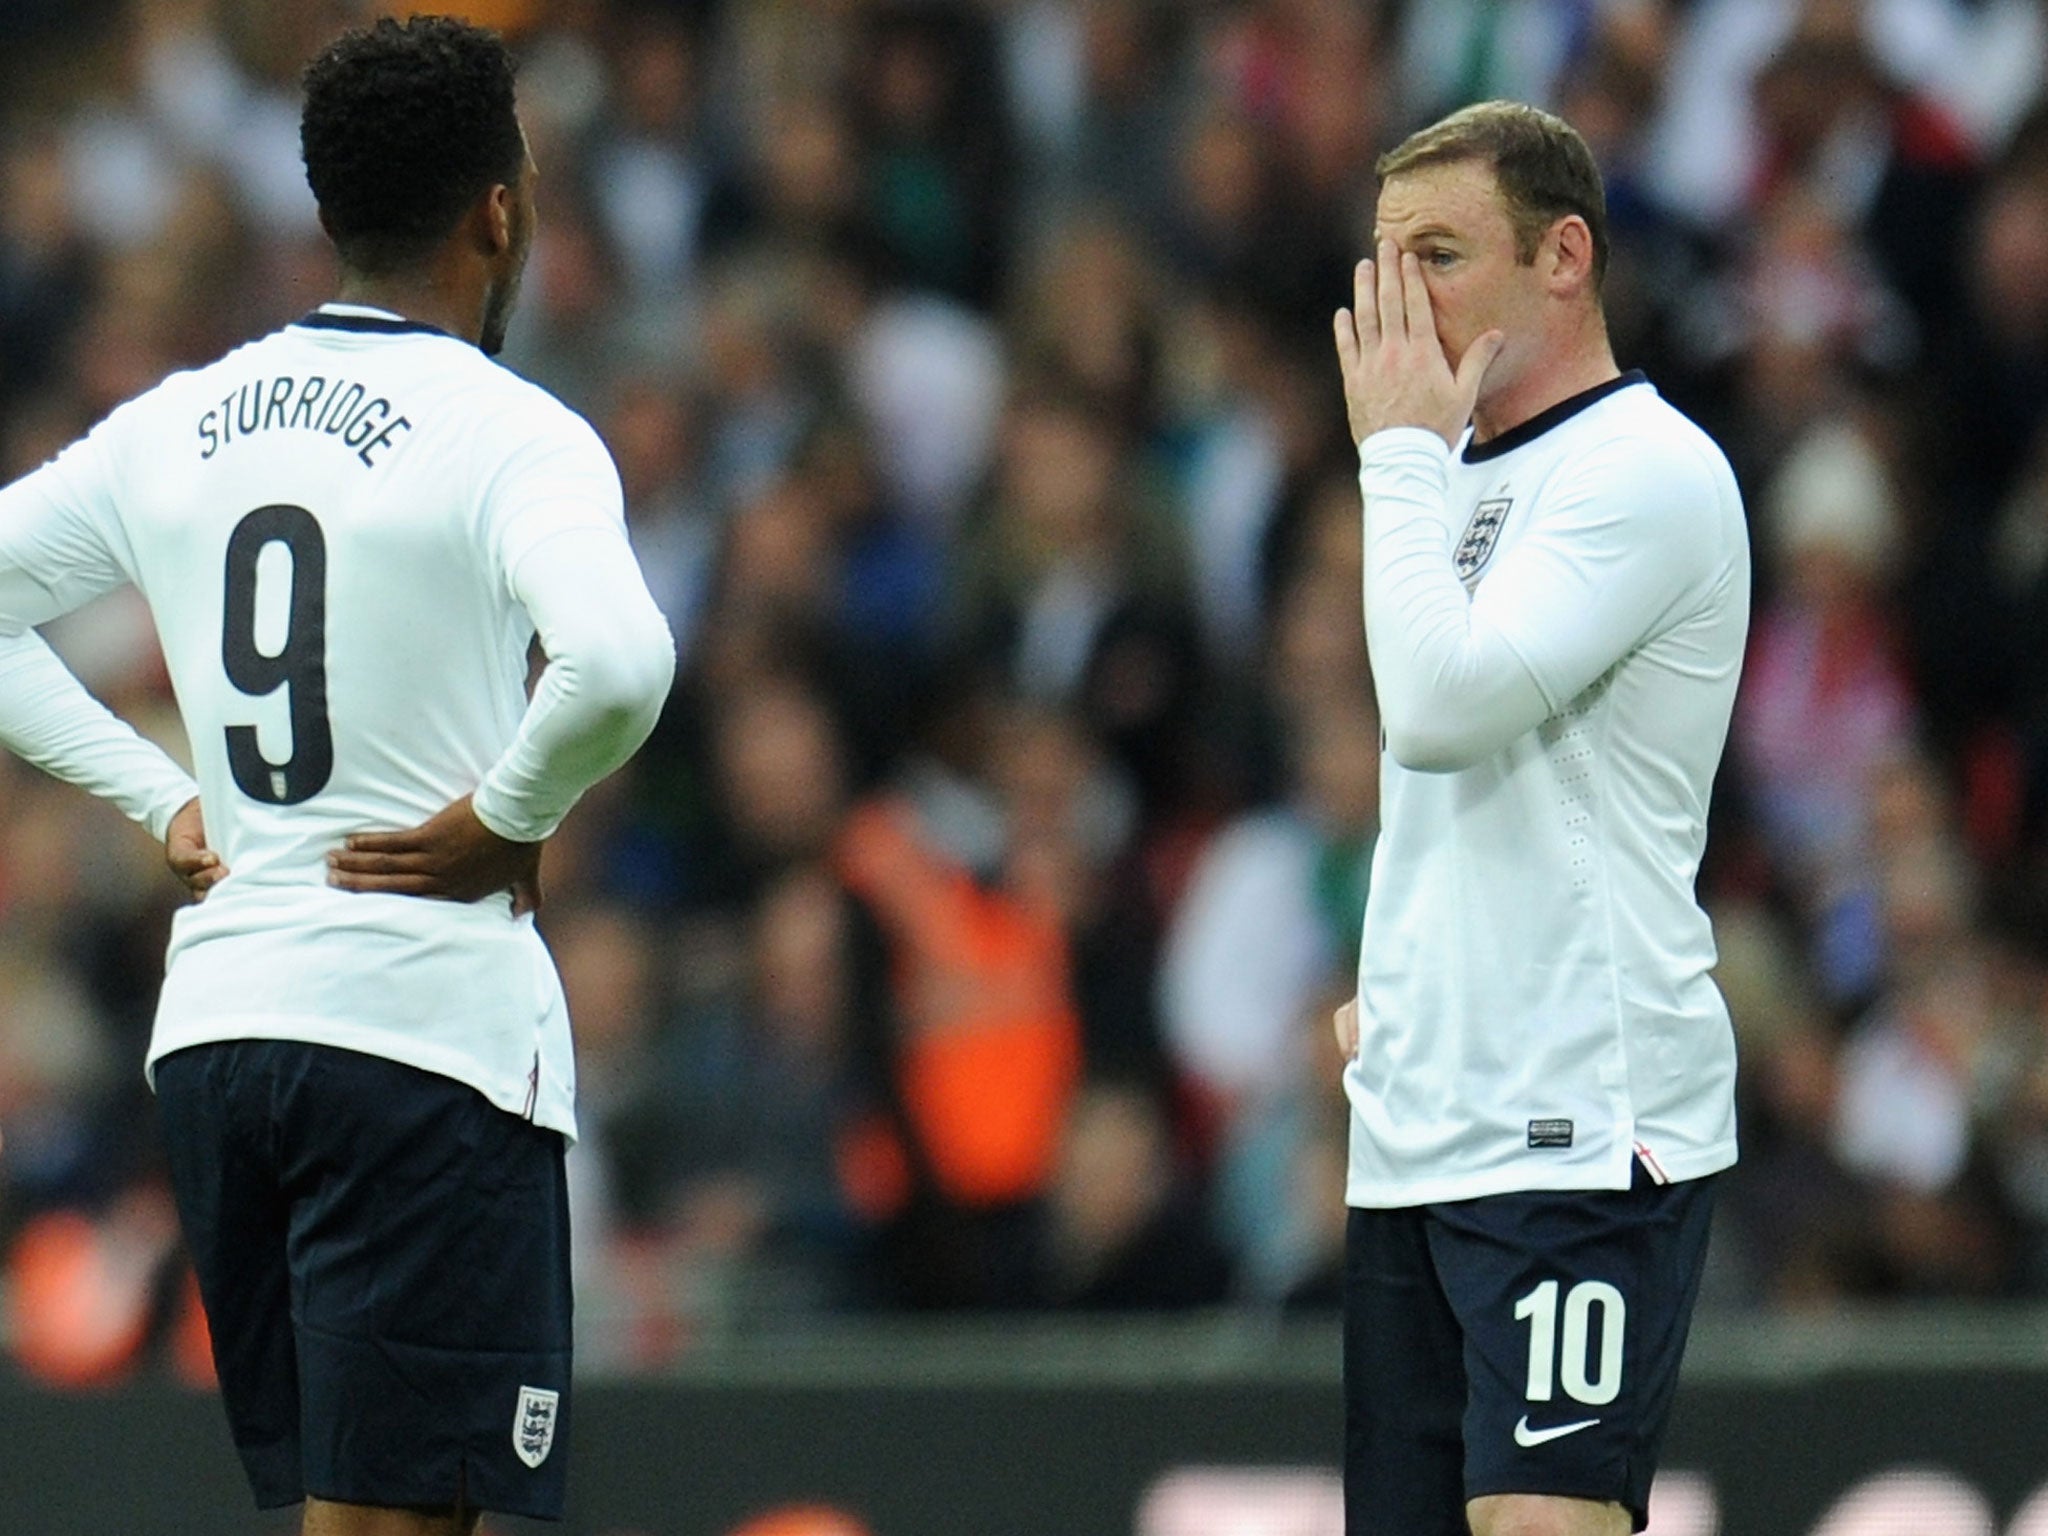 Daniel Sturridge and Wayne Rooney in action for England against Ireland in May